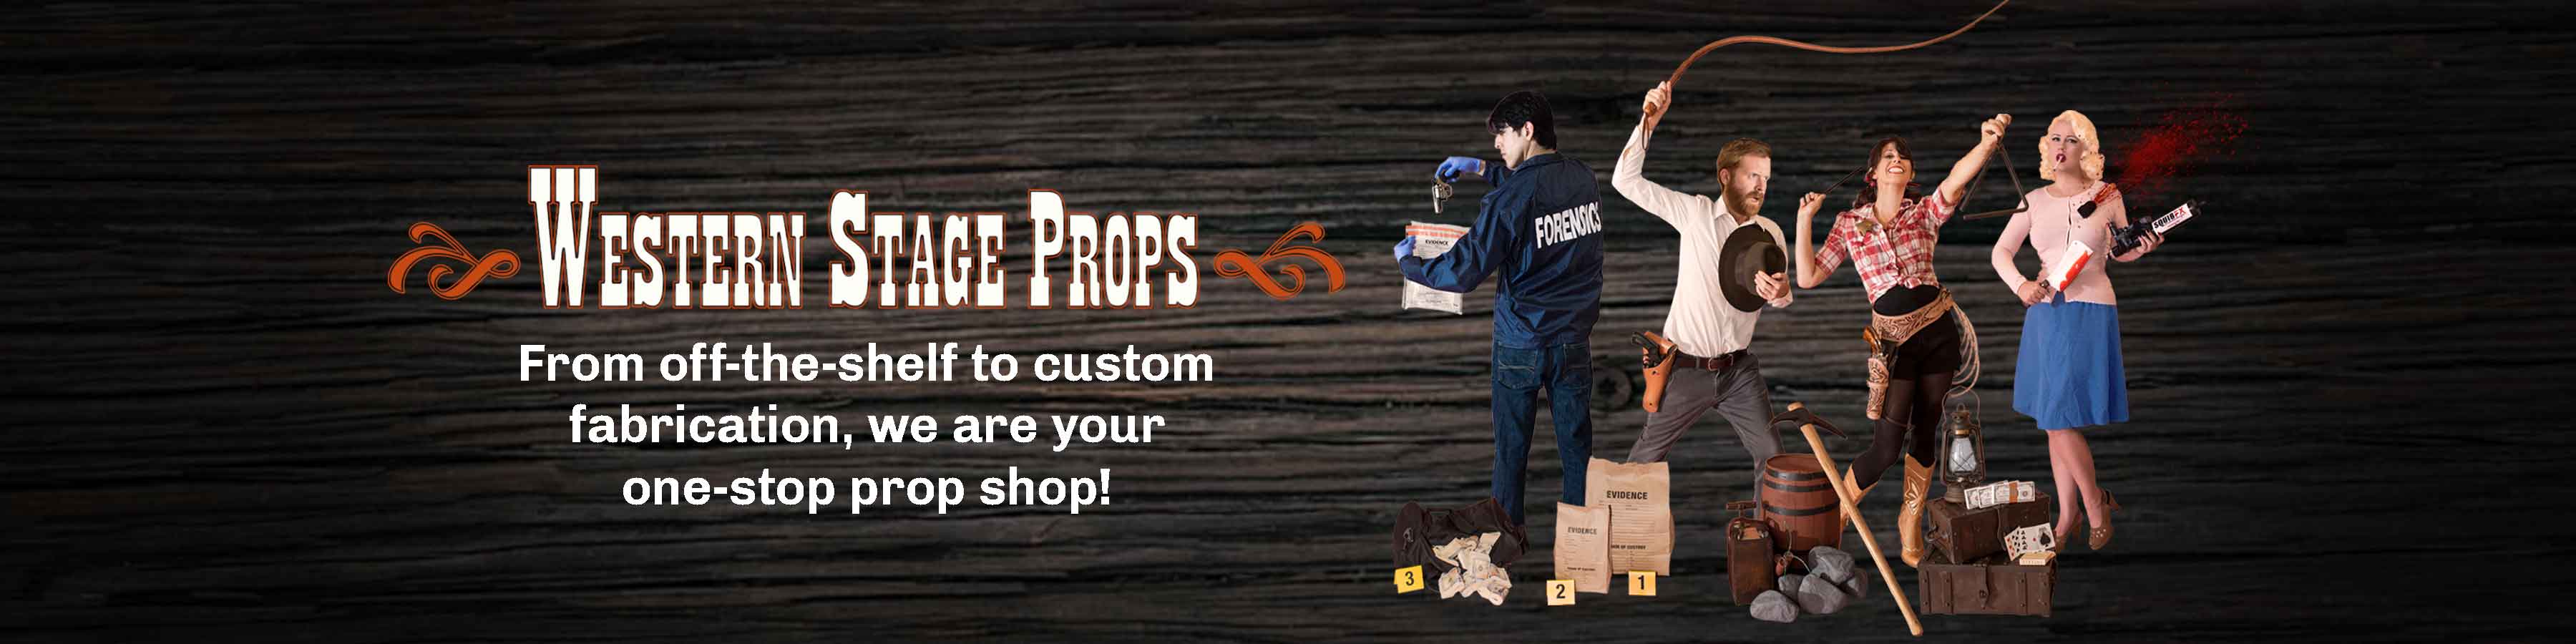 Western Stage Props "from off-the-shelf to custom fabrication, we are your one-stop prop shop!" 